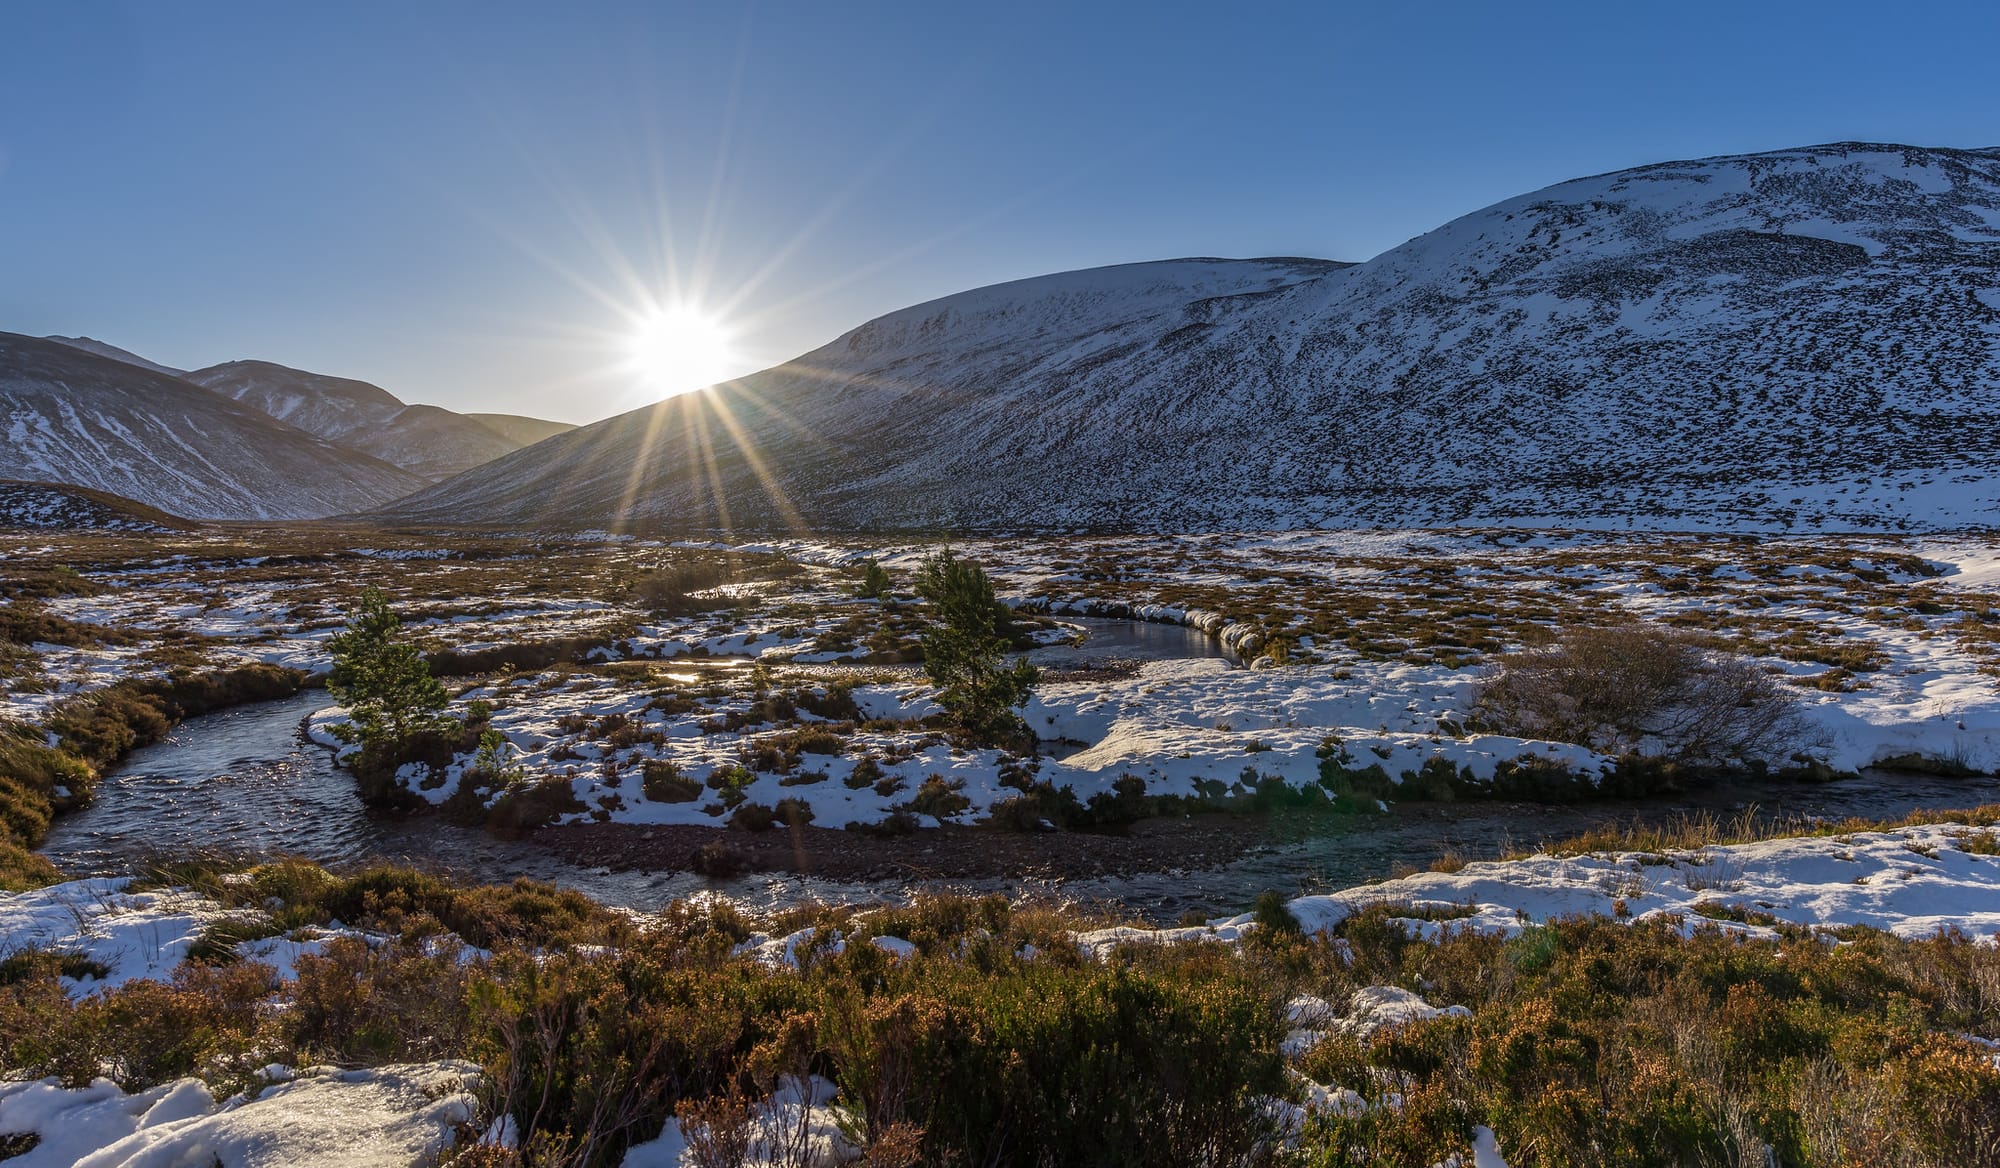 A river curving through a hilly landscape with snow, and the sun just over the horizon in a blue sky